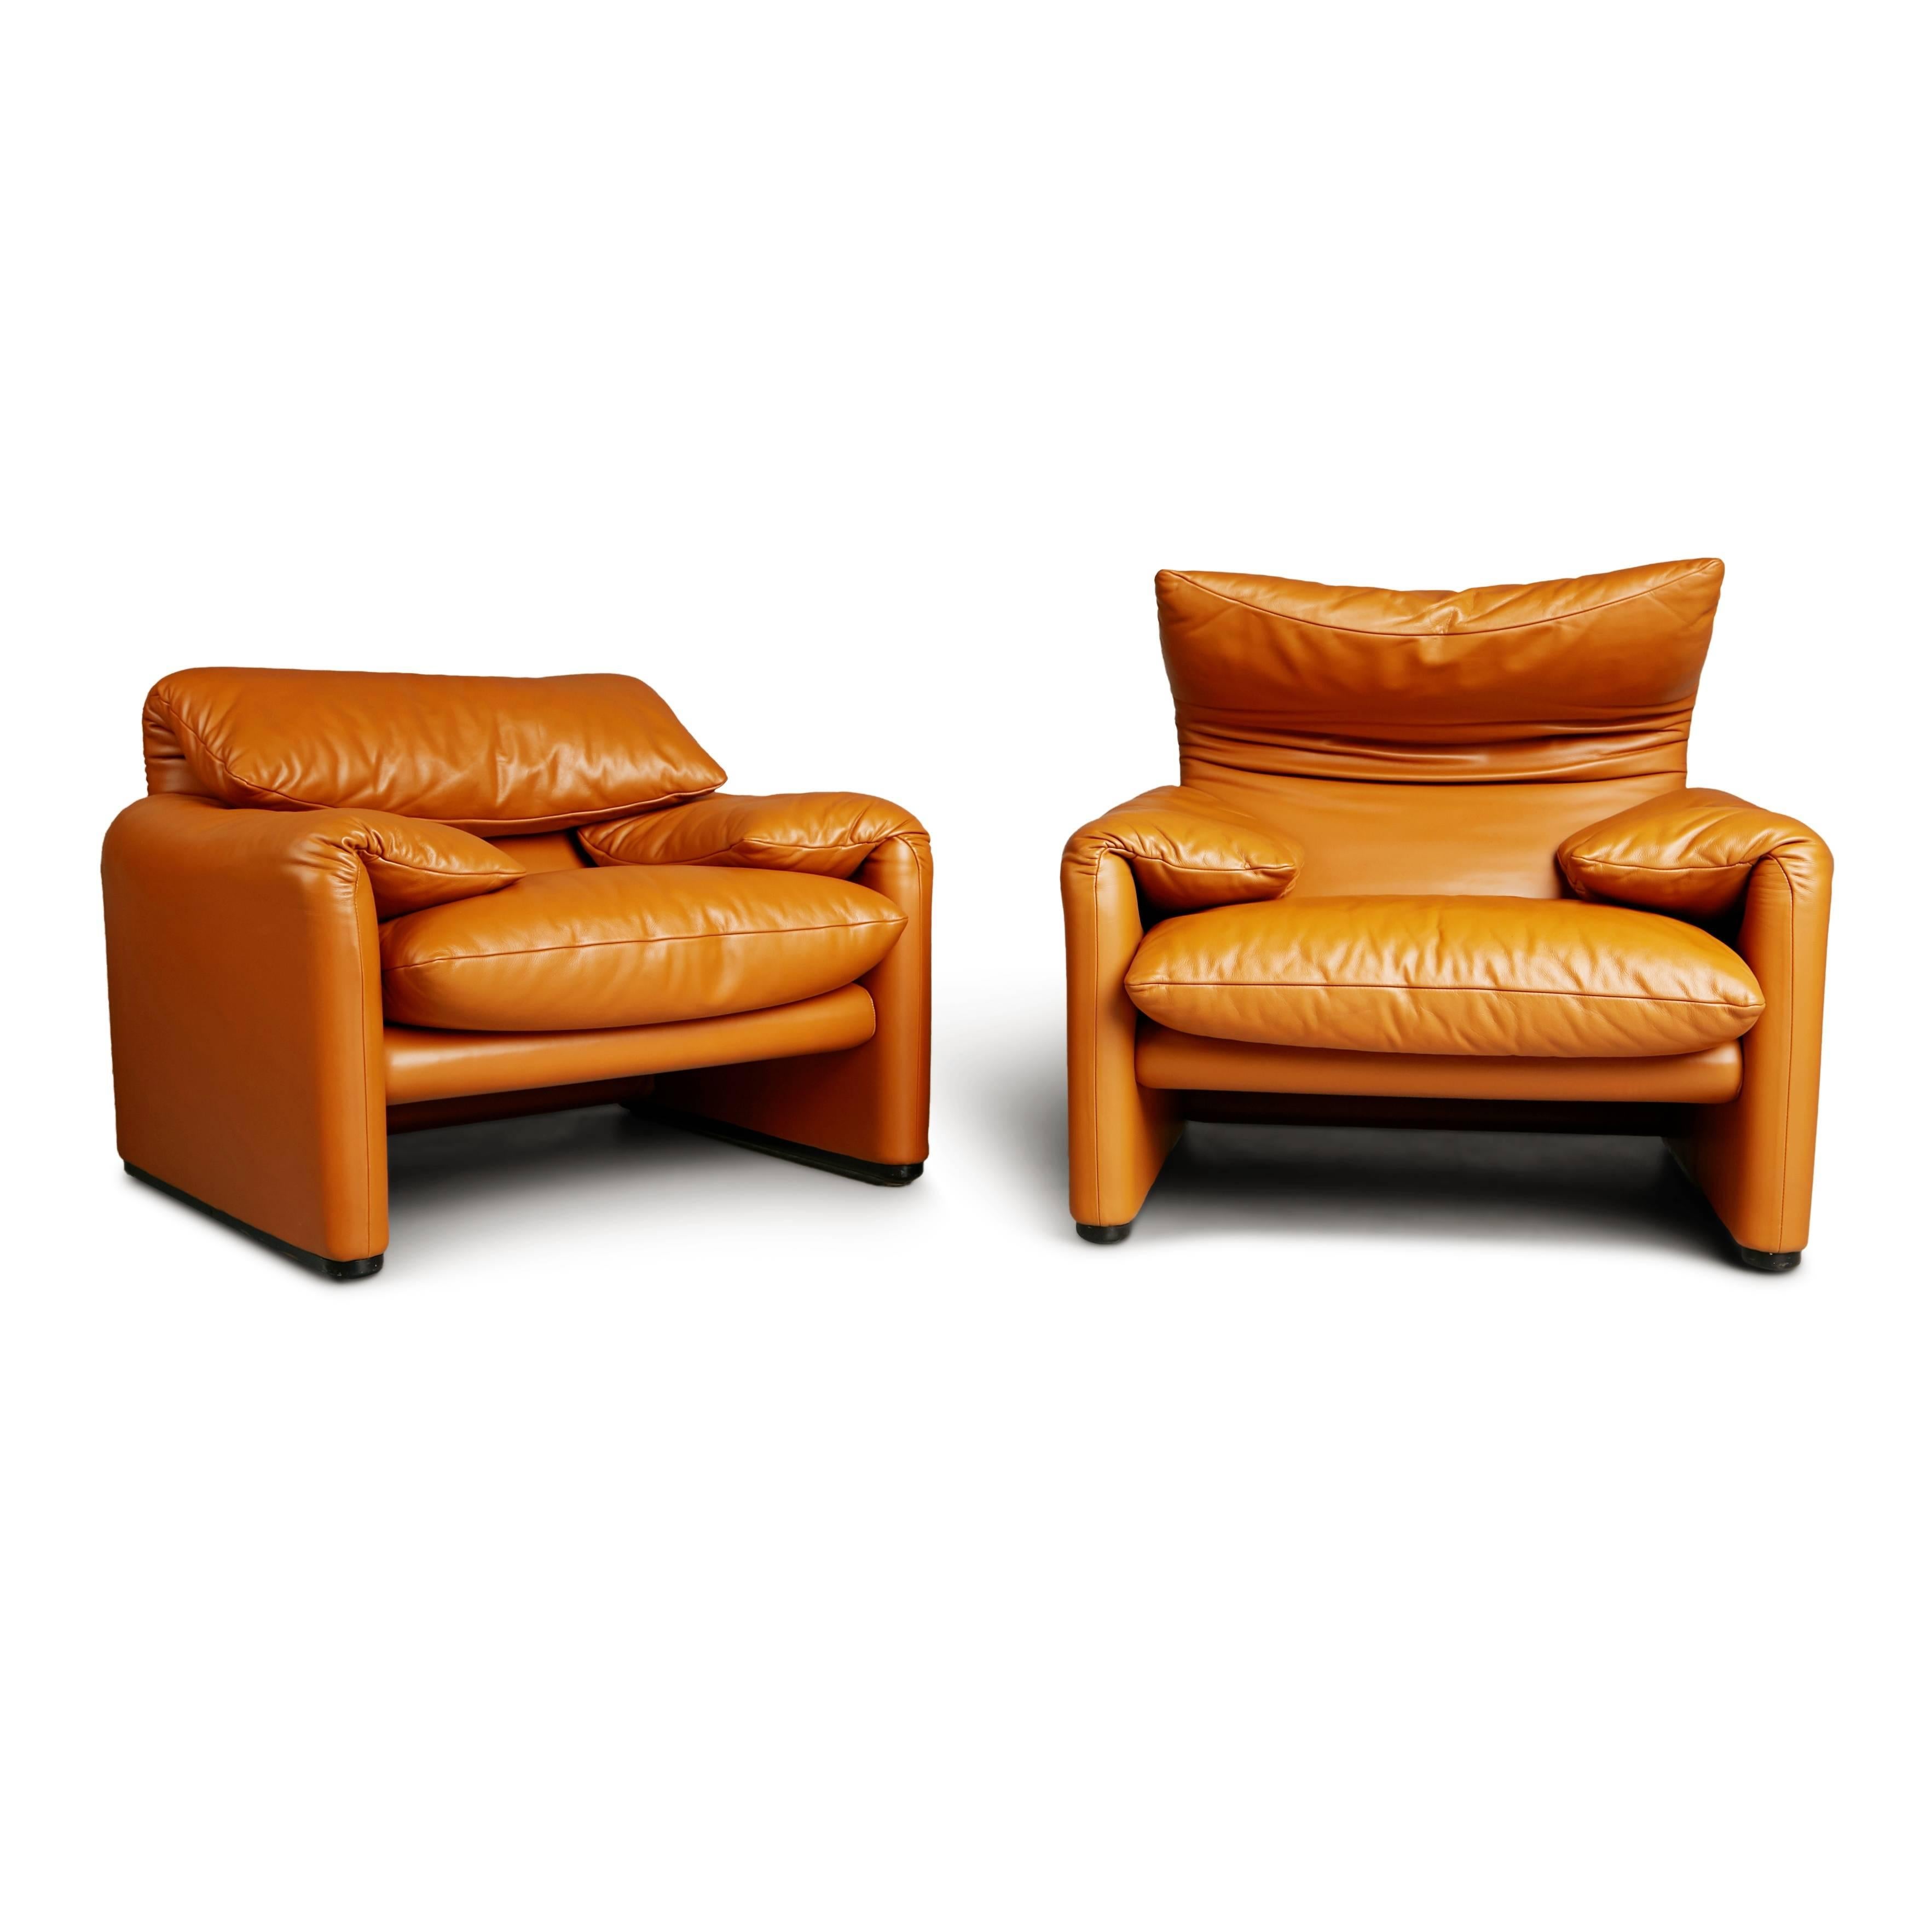 Wonderful pair of Vico Magistretti's award-winning 1973 Maralunga chairs for Cassina. Featuring the original sumptuous tan leather upholstery which has been kept in excellent condition and shows an admirable patina. These traces of age and use bring